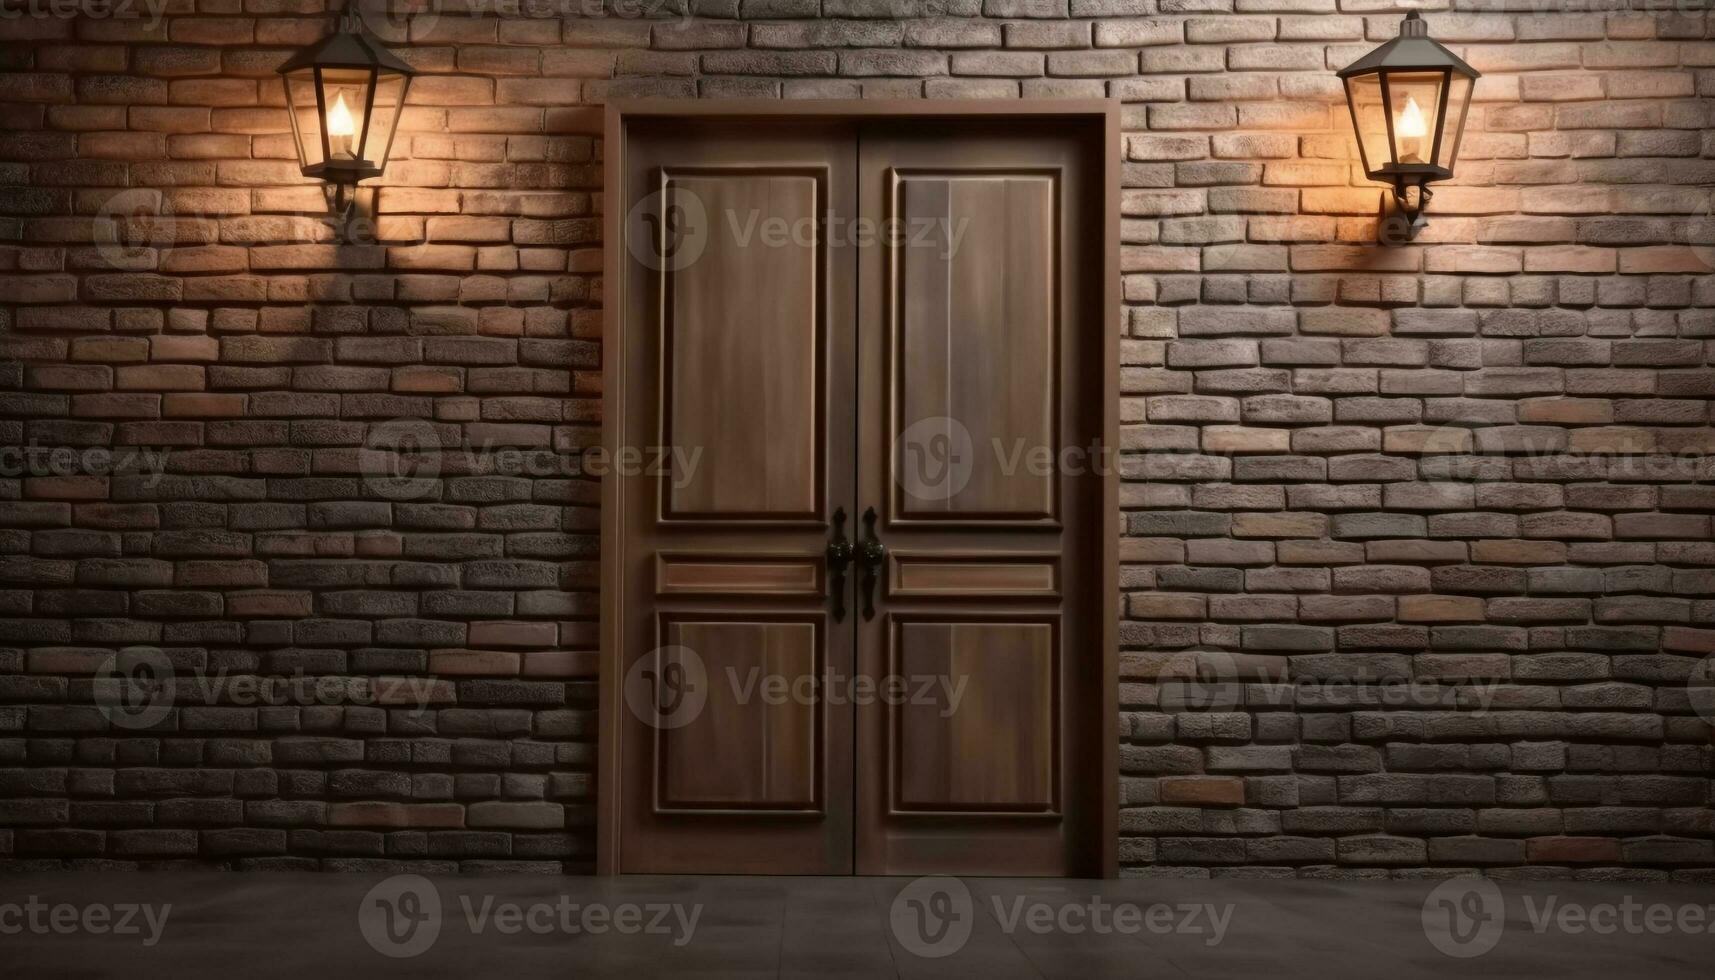 Modern elegance illuminates rustic brick wall in luxury apartment entrance generated by AI photo